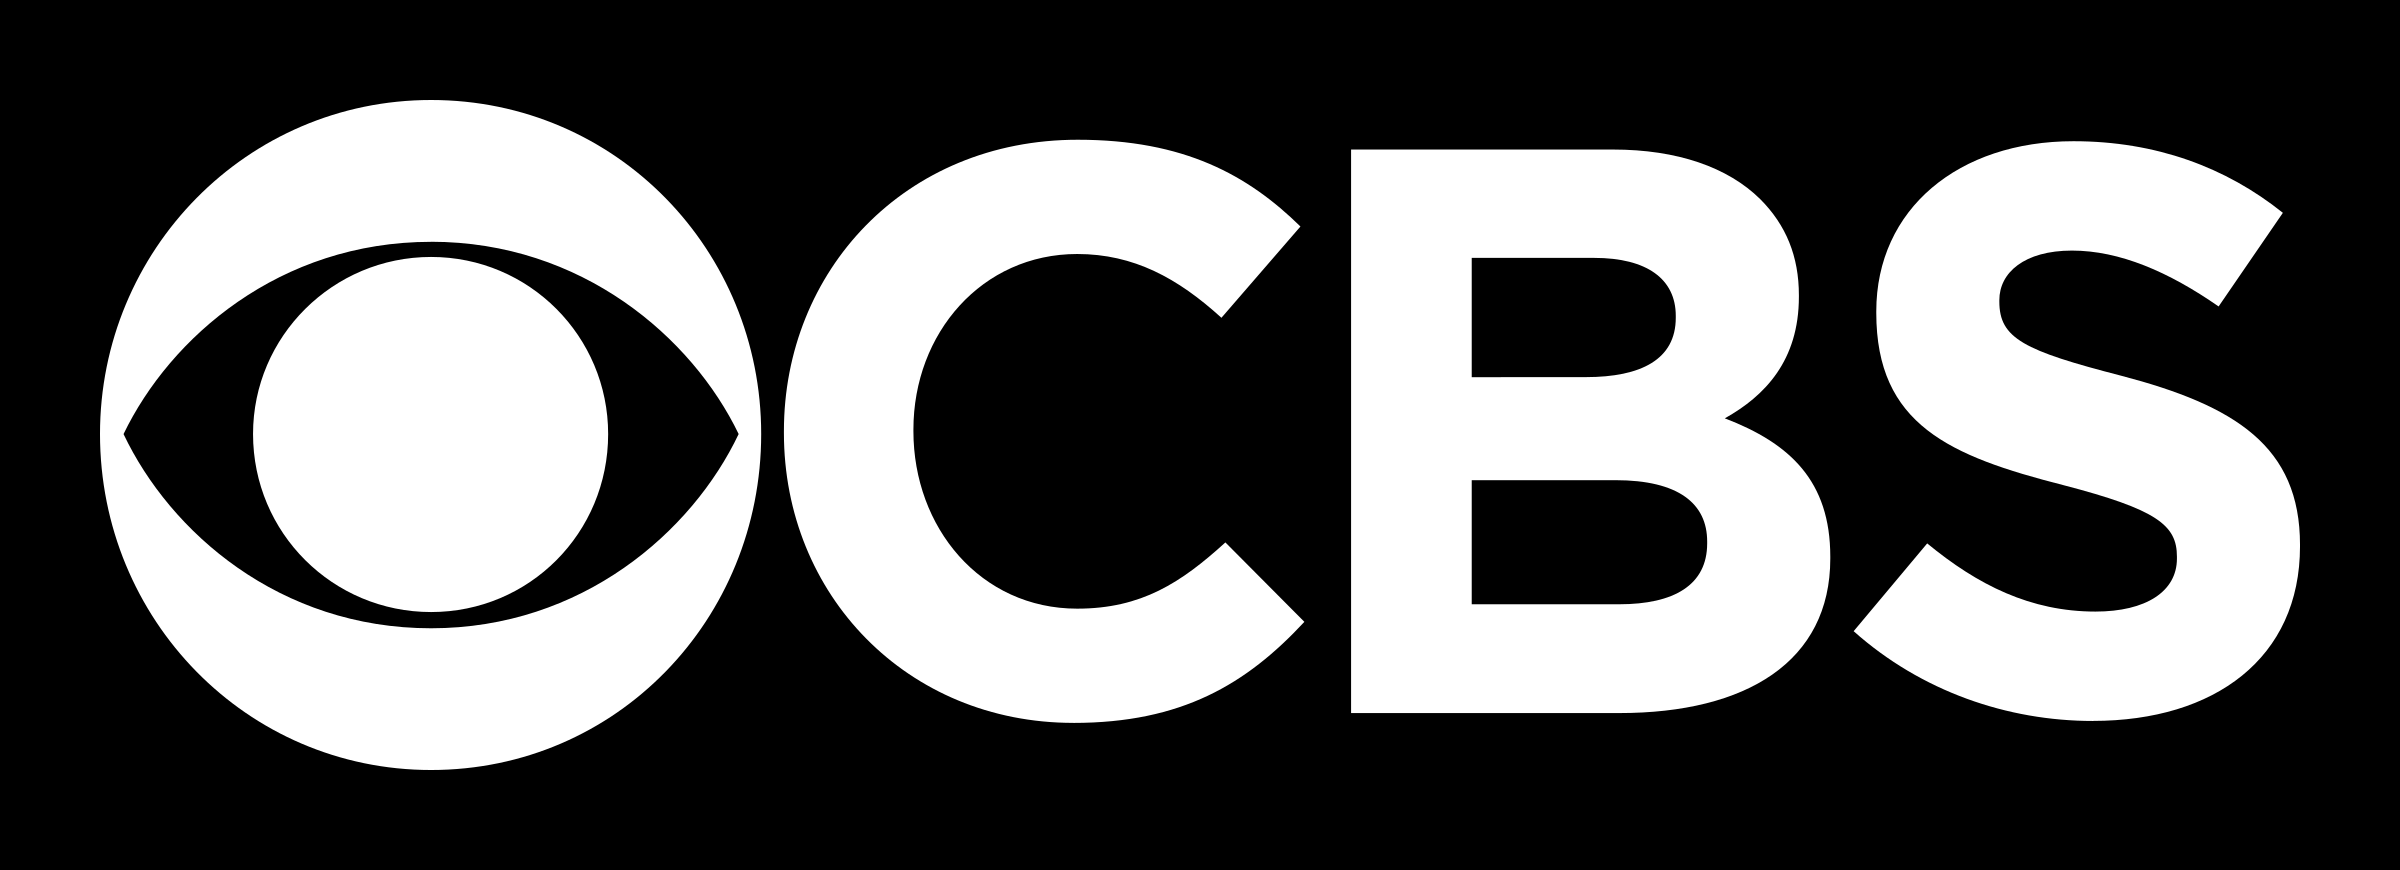 cbs-logo-black-and-white.png